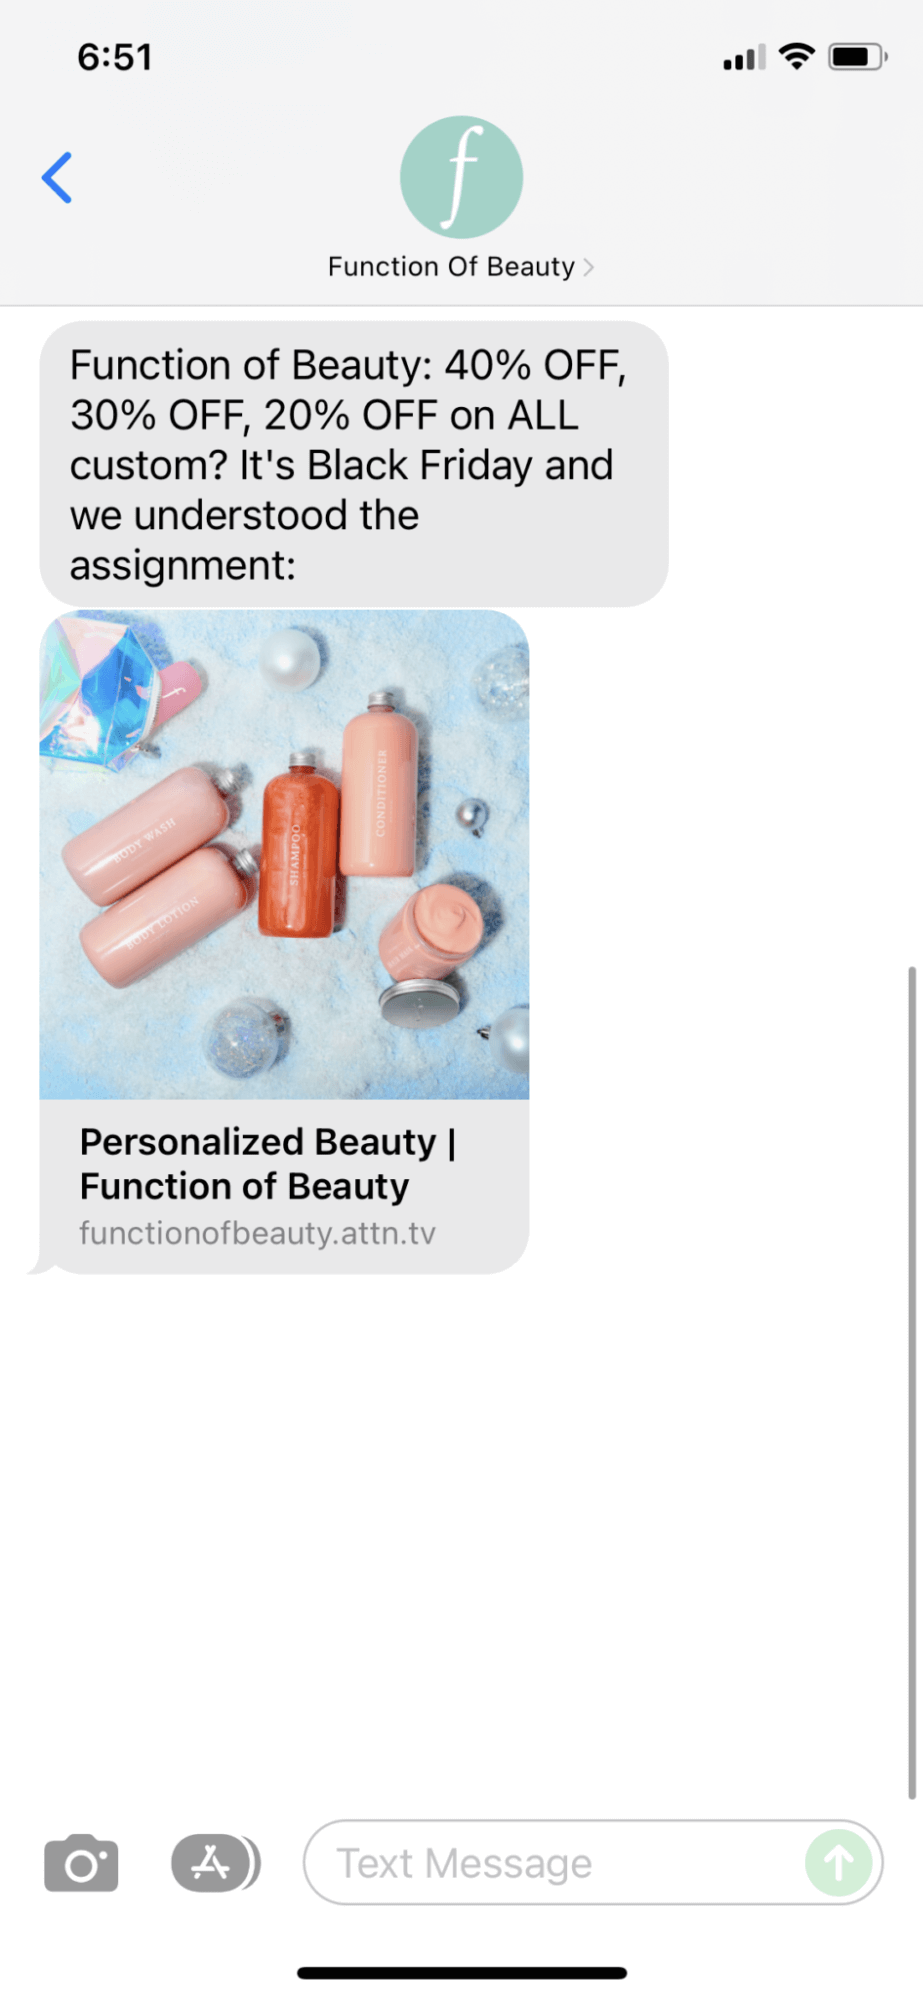 Fun SMS marketing by Function of Beauty